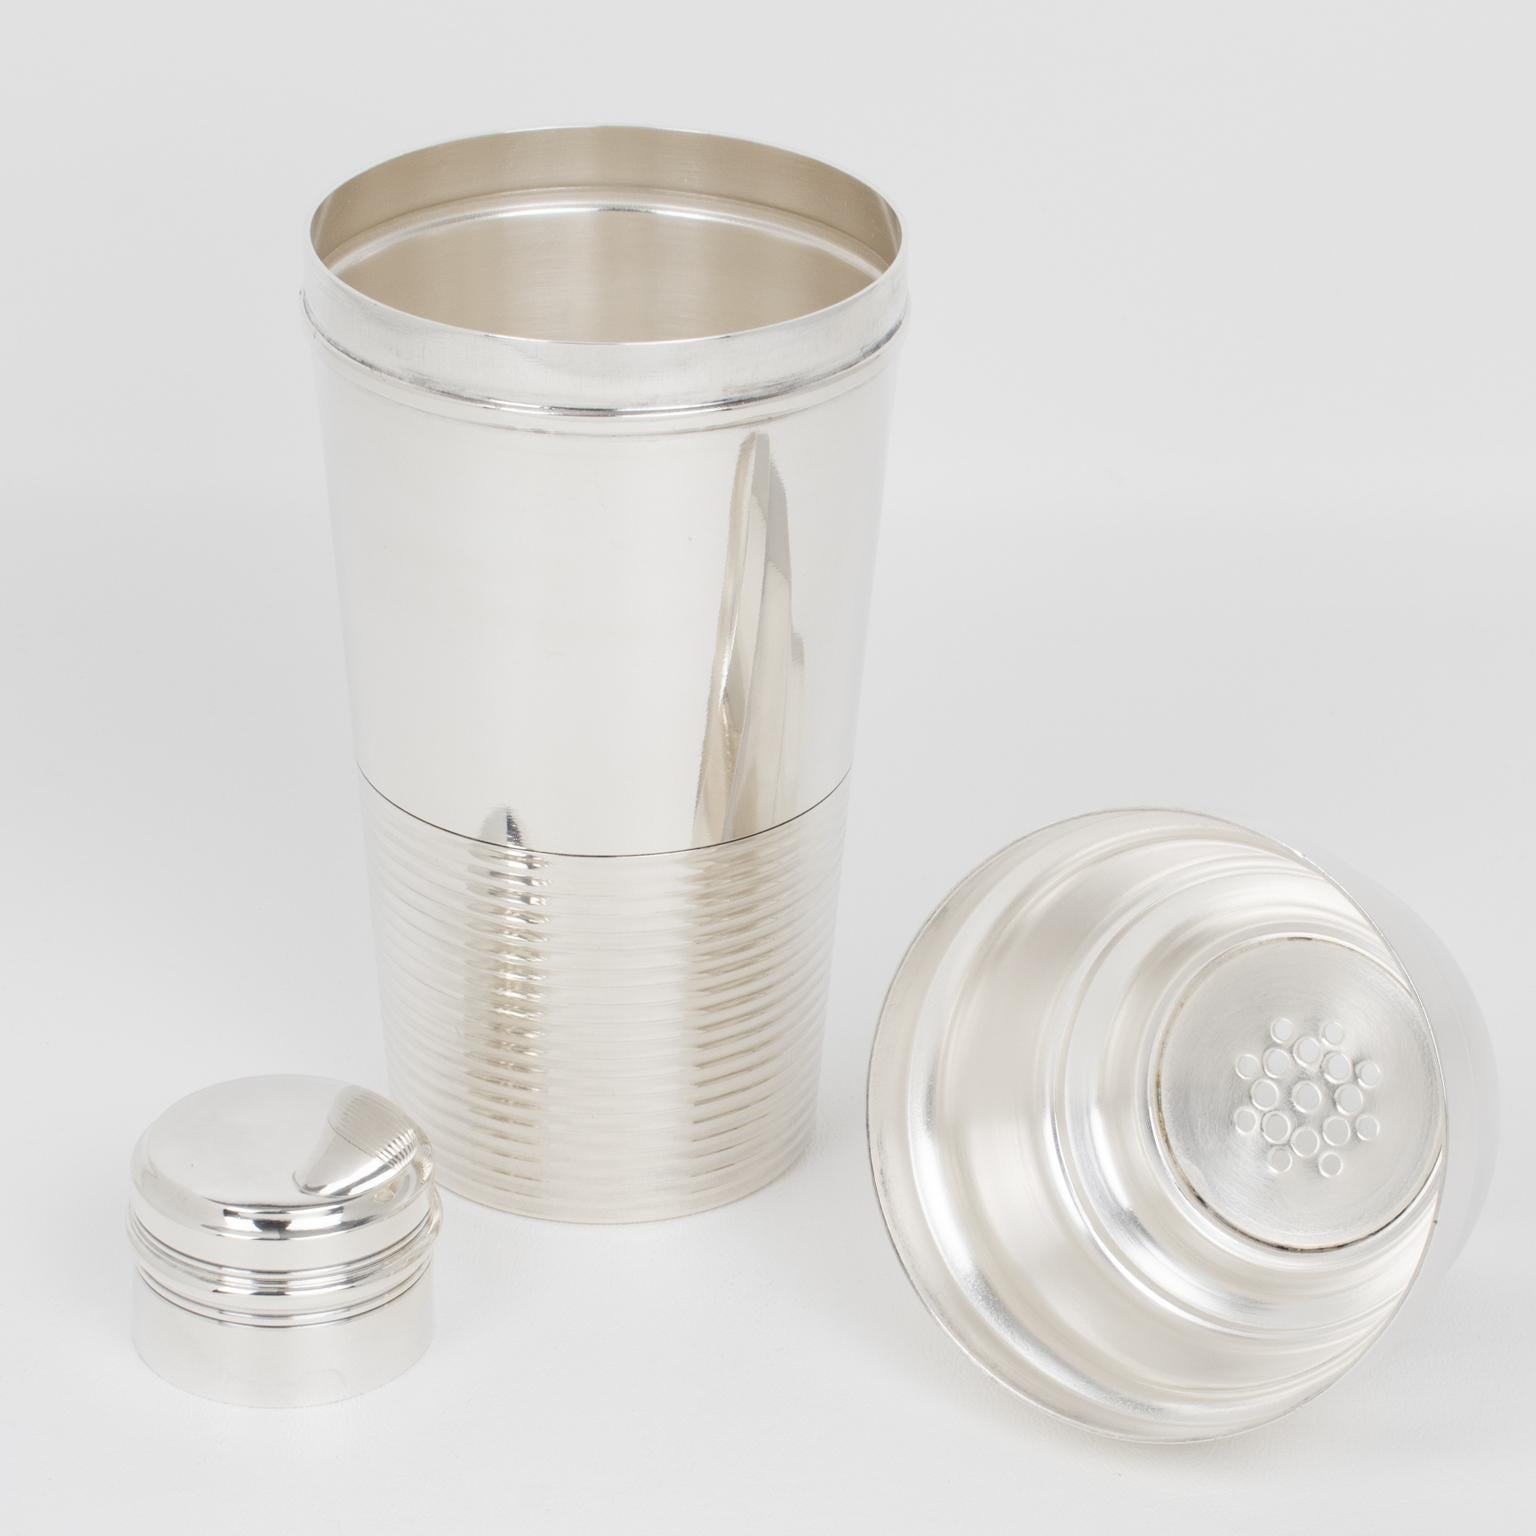 French Art Deco Silver Plate Cocktail Shaker by SPO Paris, 1940s For Sale